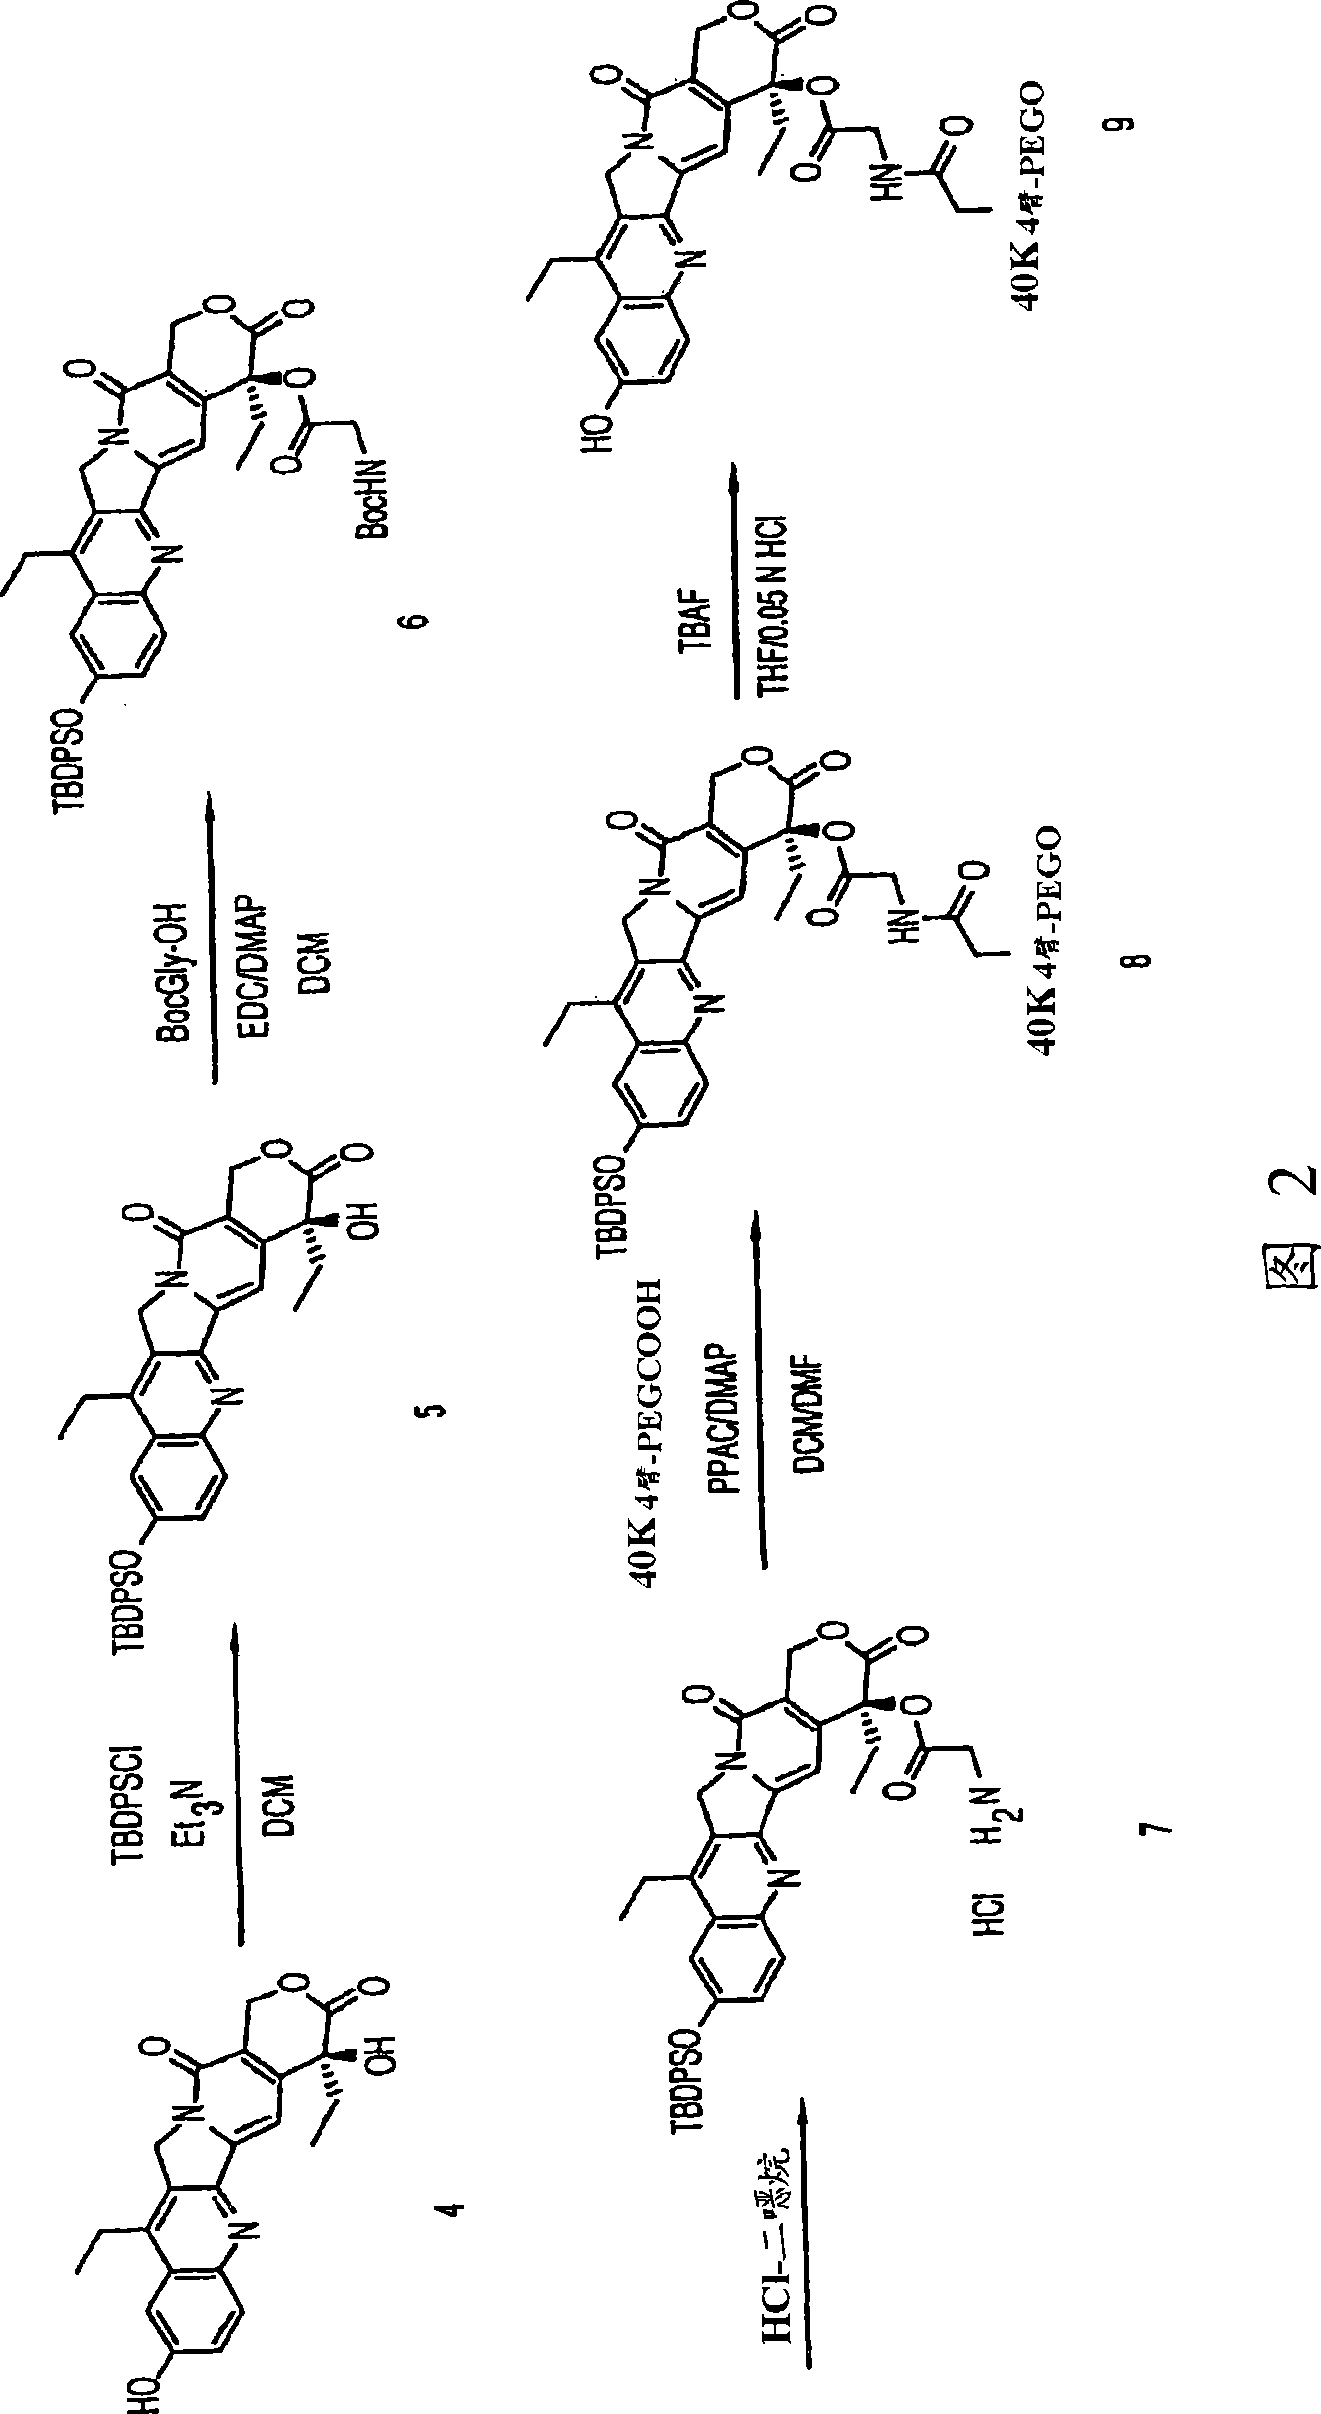 Multi-arm polymeric conjugates of 7-ethyl-10-hydroxycamptothecin for treatment of breast, colorectal, pancreatic, ovarian and lung cancers